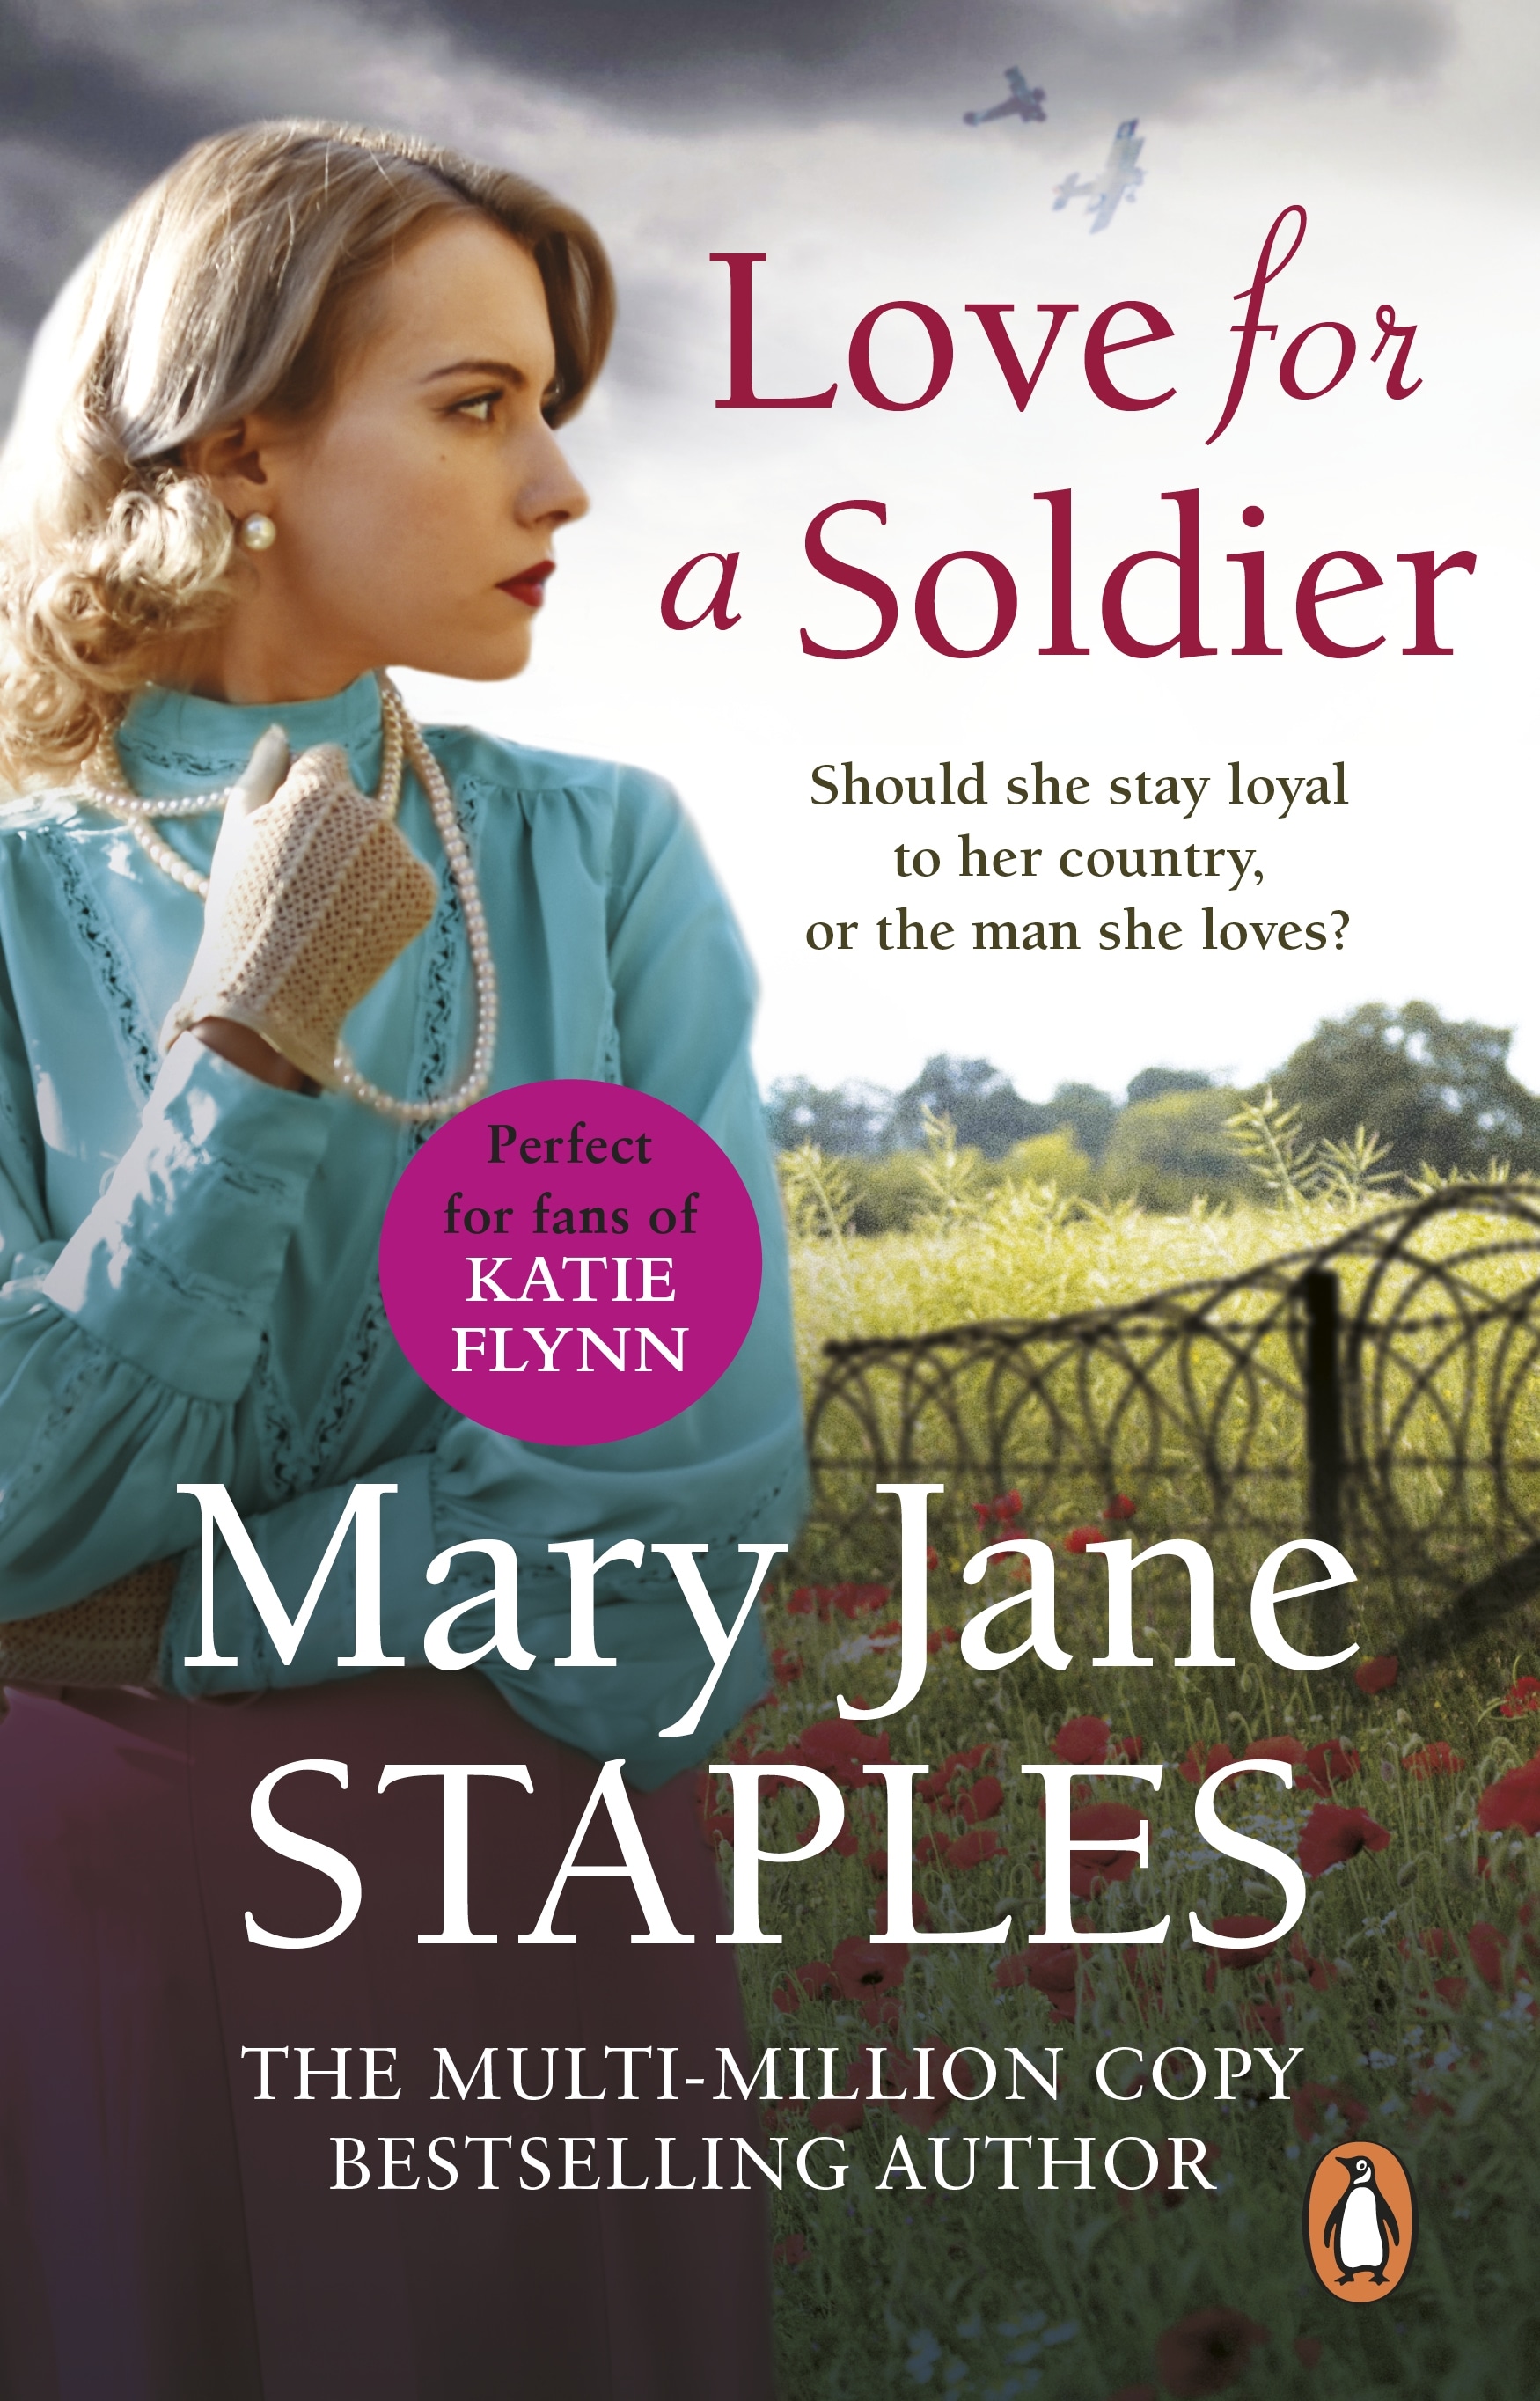 Book “Love for a Soldier” by Mary Jane Staples — February 18, 2021